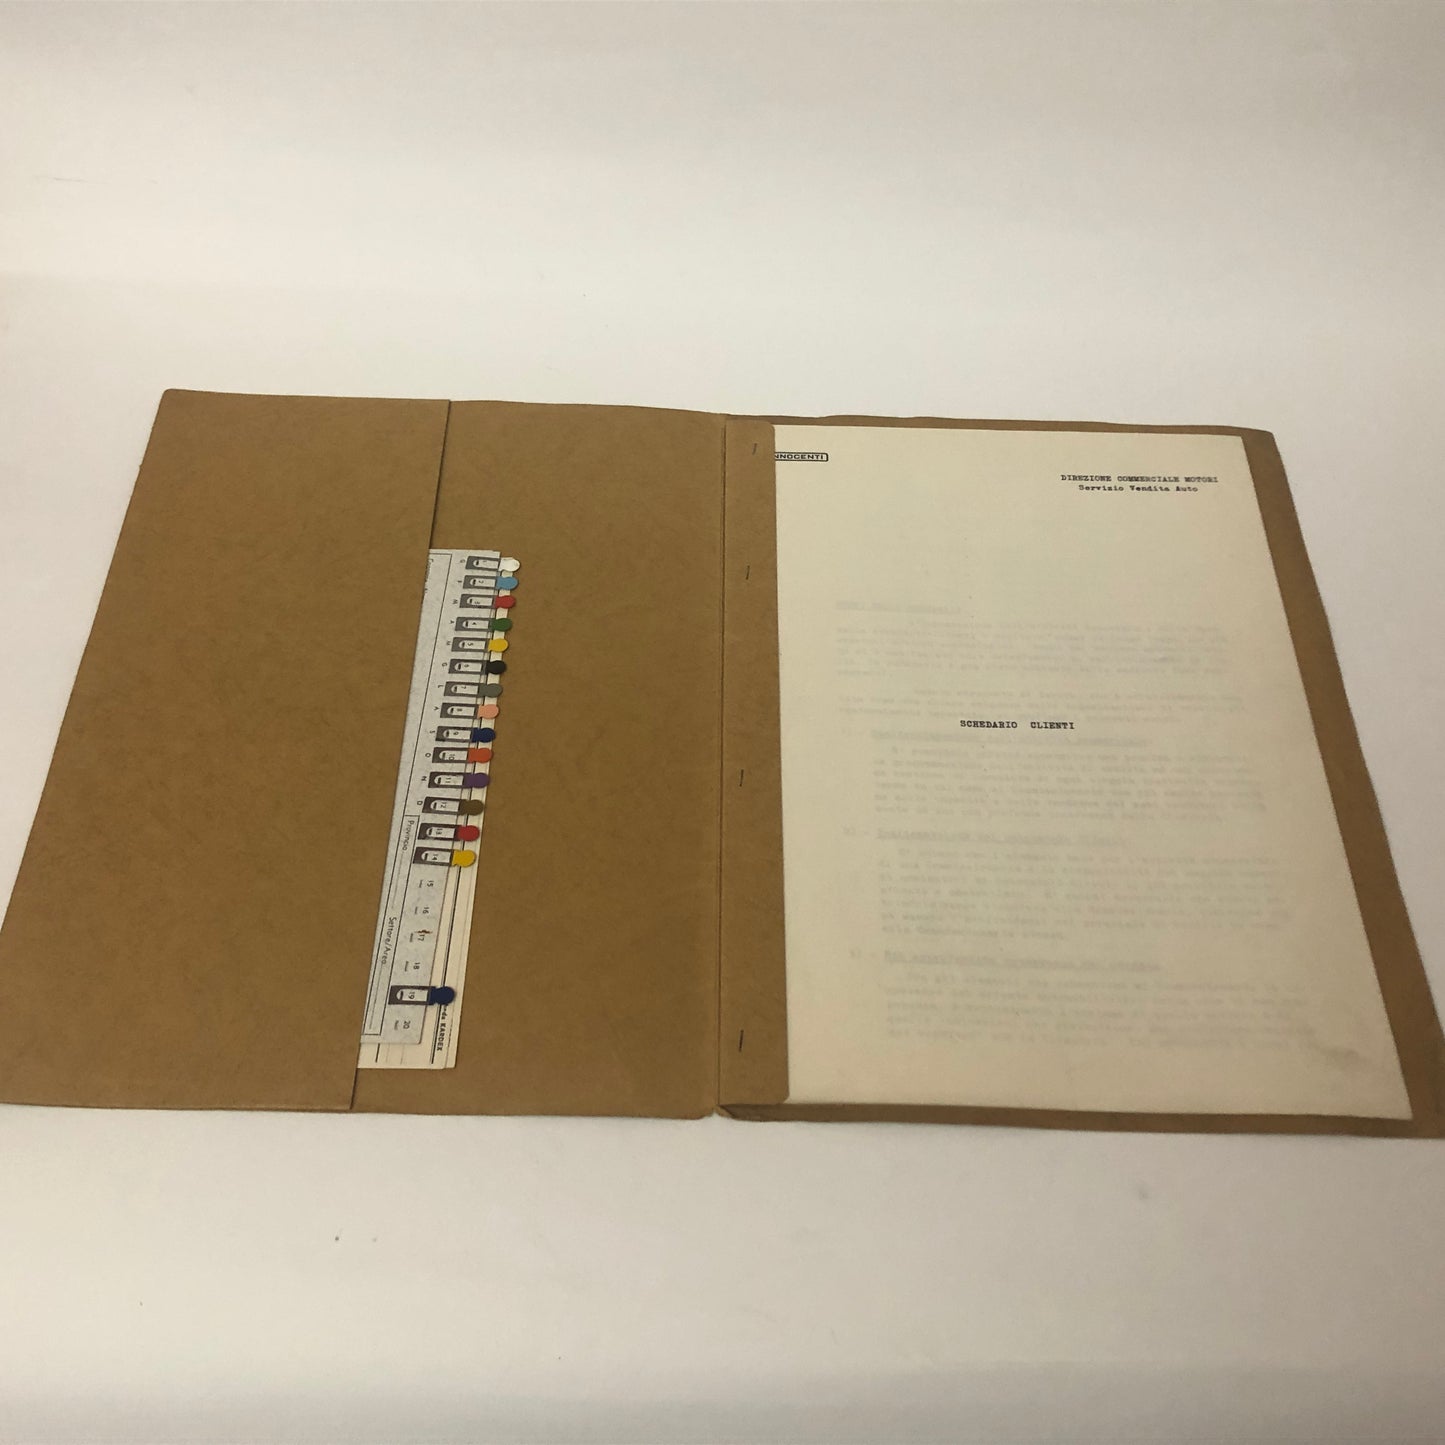 Innocenti, Instructions on the Correct Compilation of the Customer File Reserved for Innocenti Commission Agents.